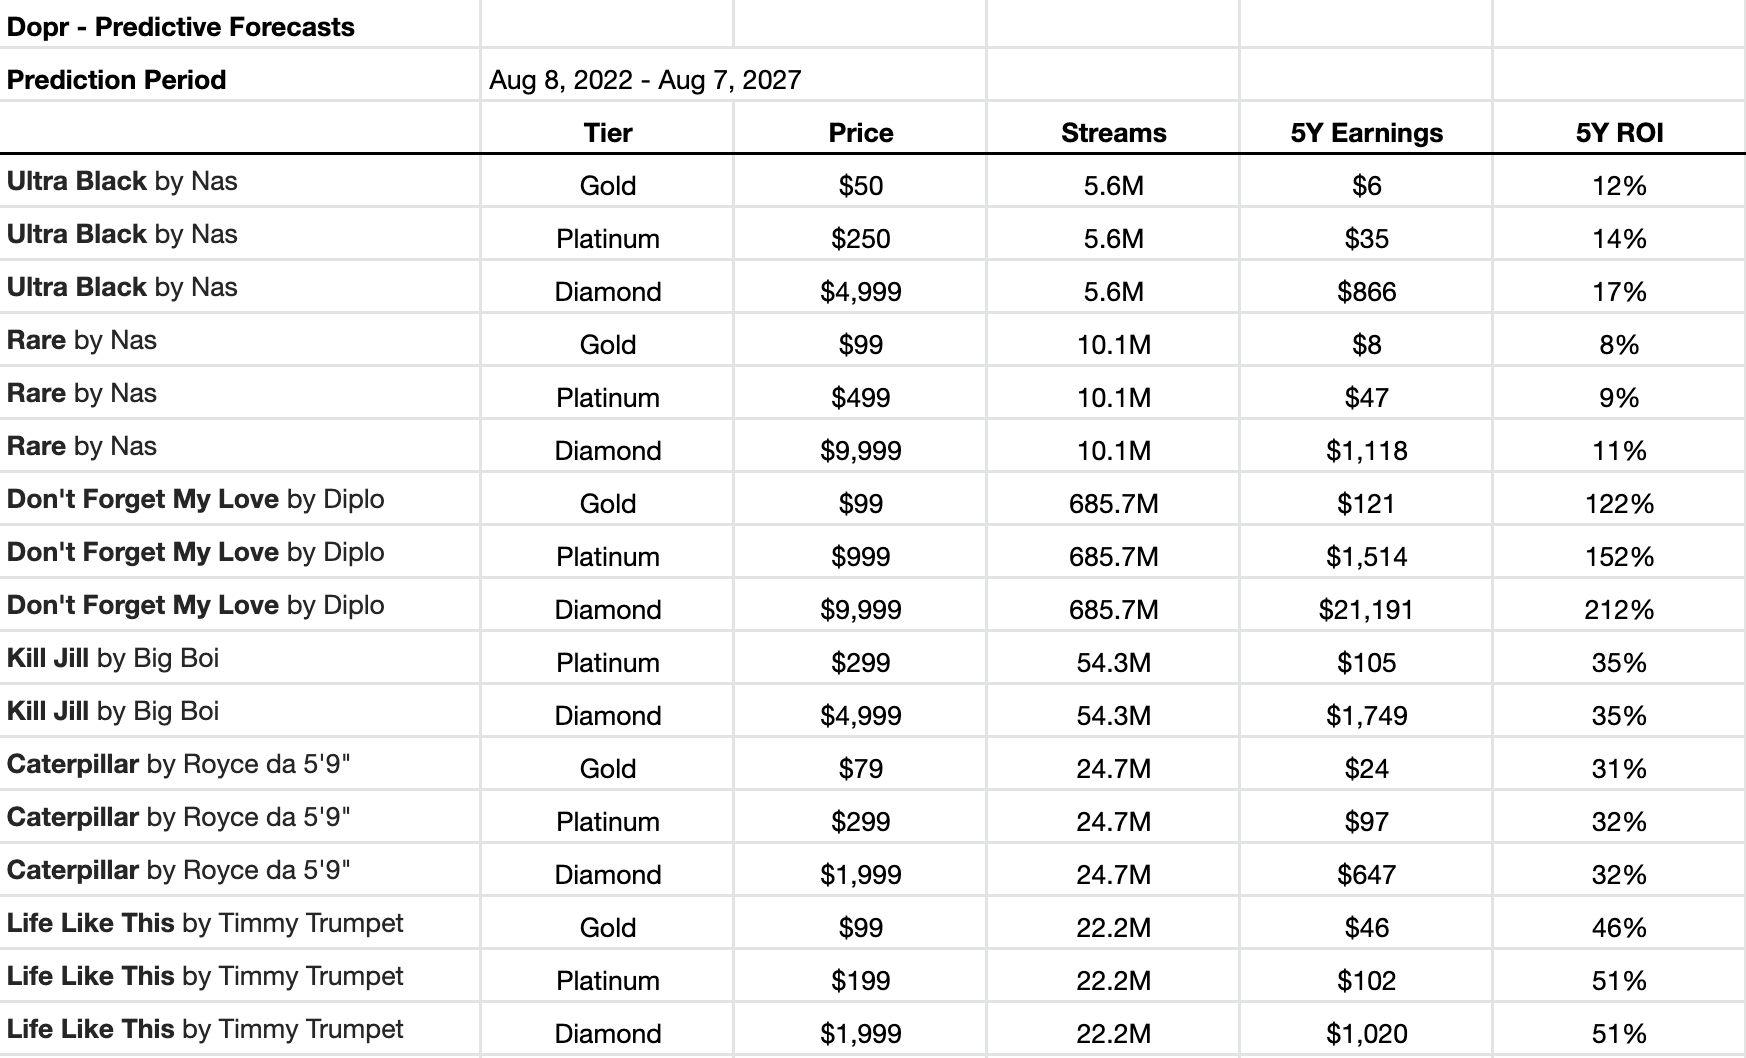 Dopr's 5-year forecasts on 6 Royal drops. The table shows median projections for streams, token earnings, and ROI. 